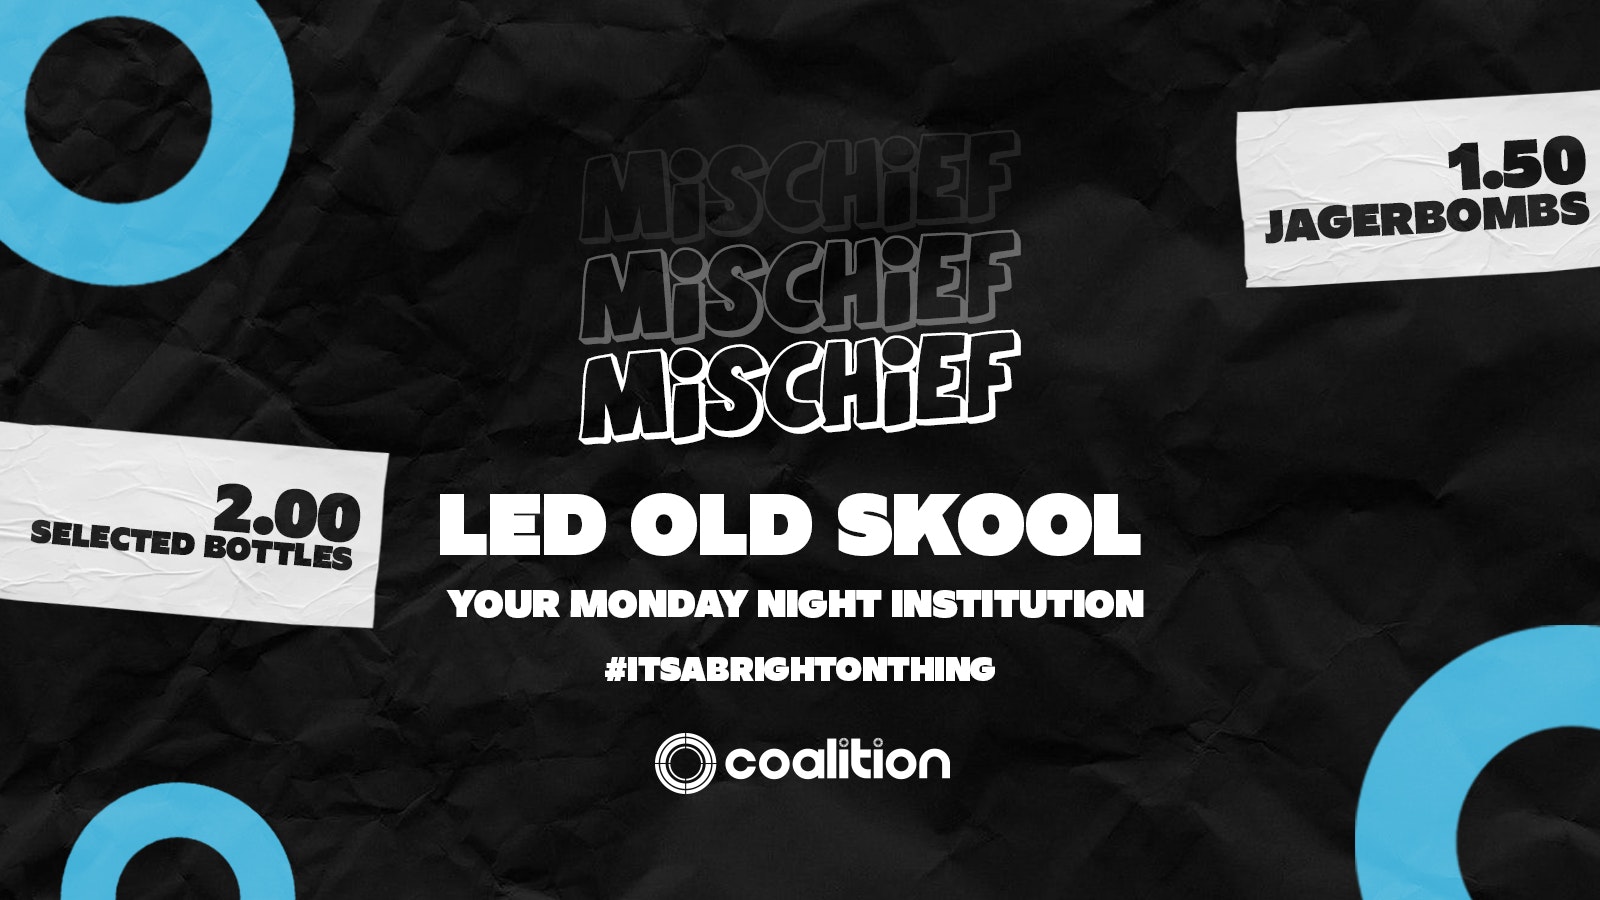 Mischief Mondays x Coalition ➤ LED Old Skool  ➤ £1.50 Jagers!